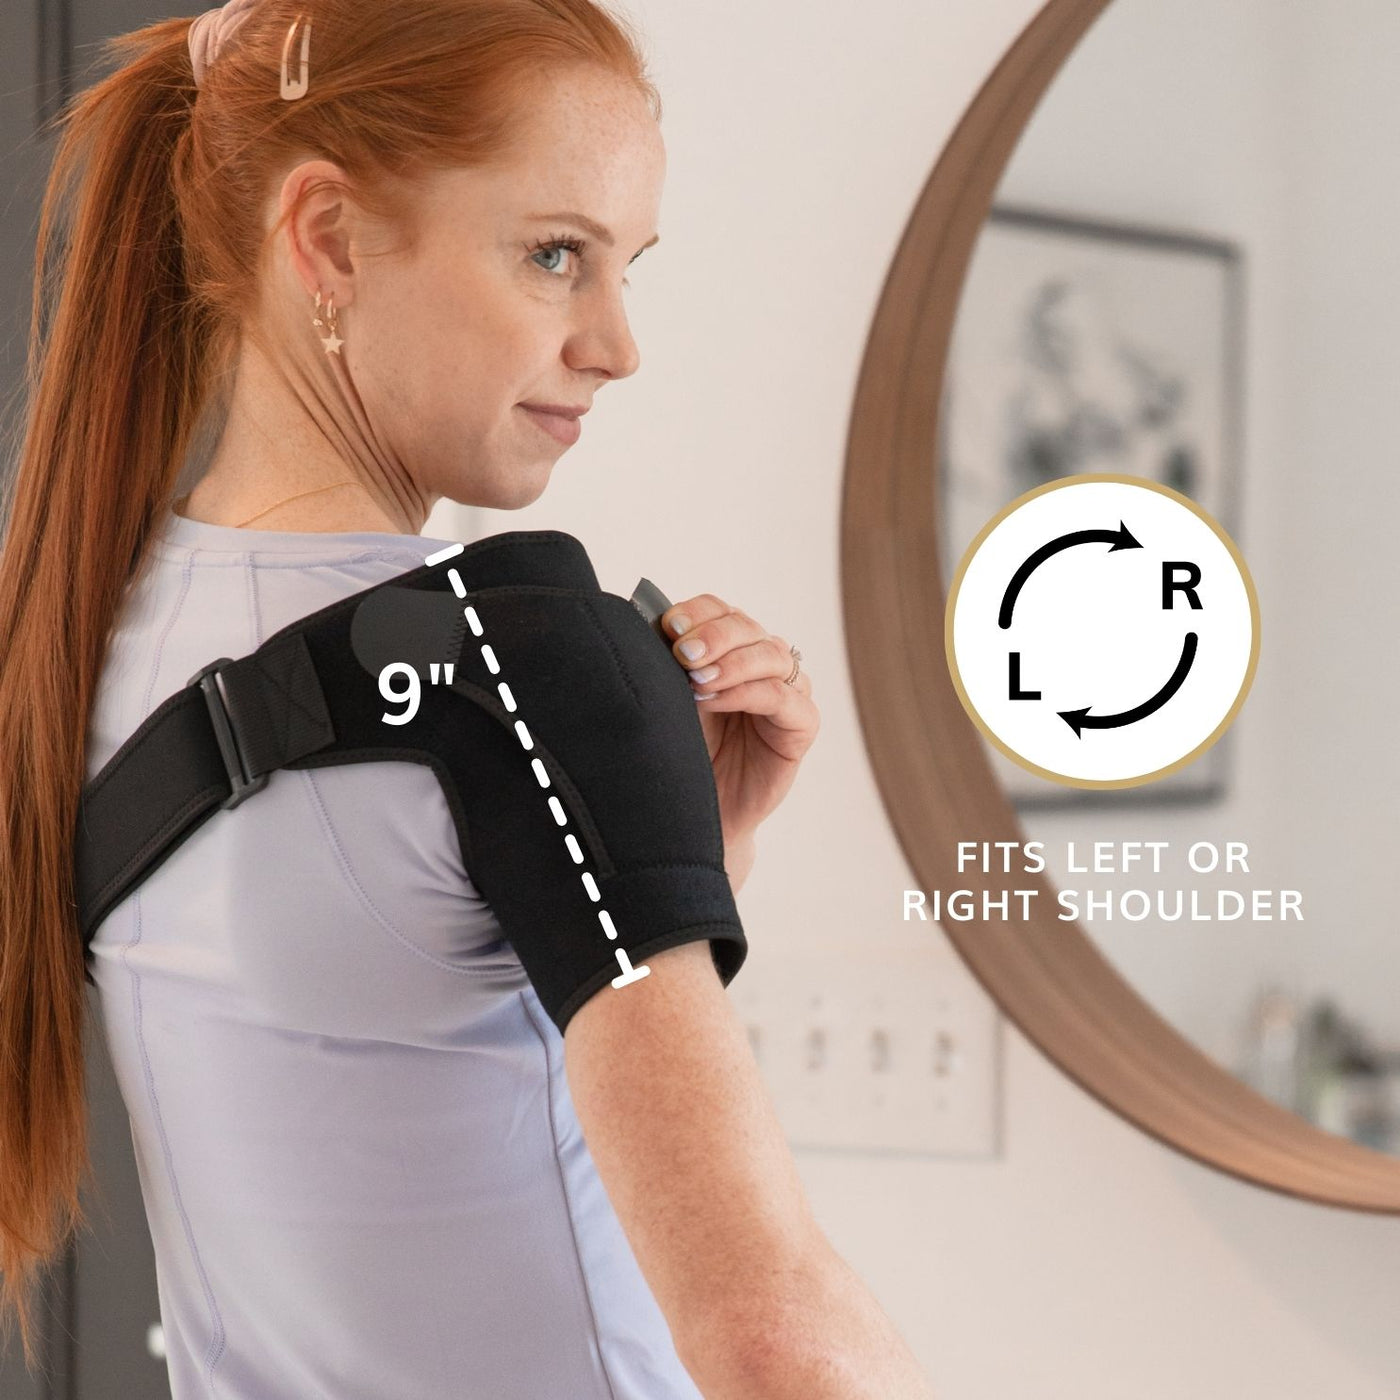 Double Shoulder Brace Support Torn Rotator Cuff Compression Sleeve